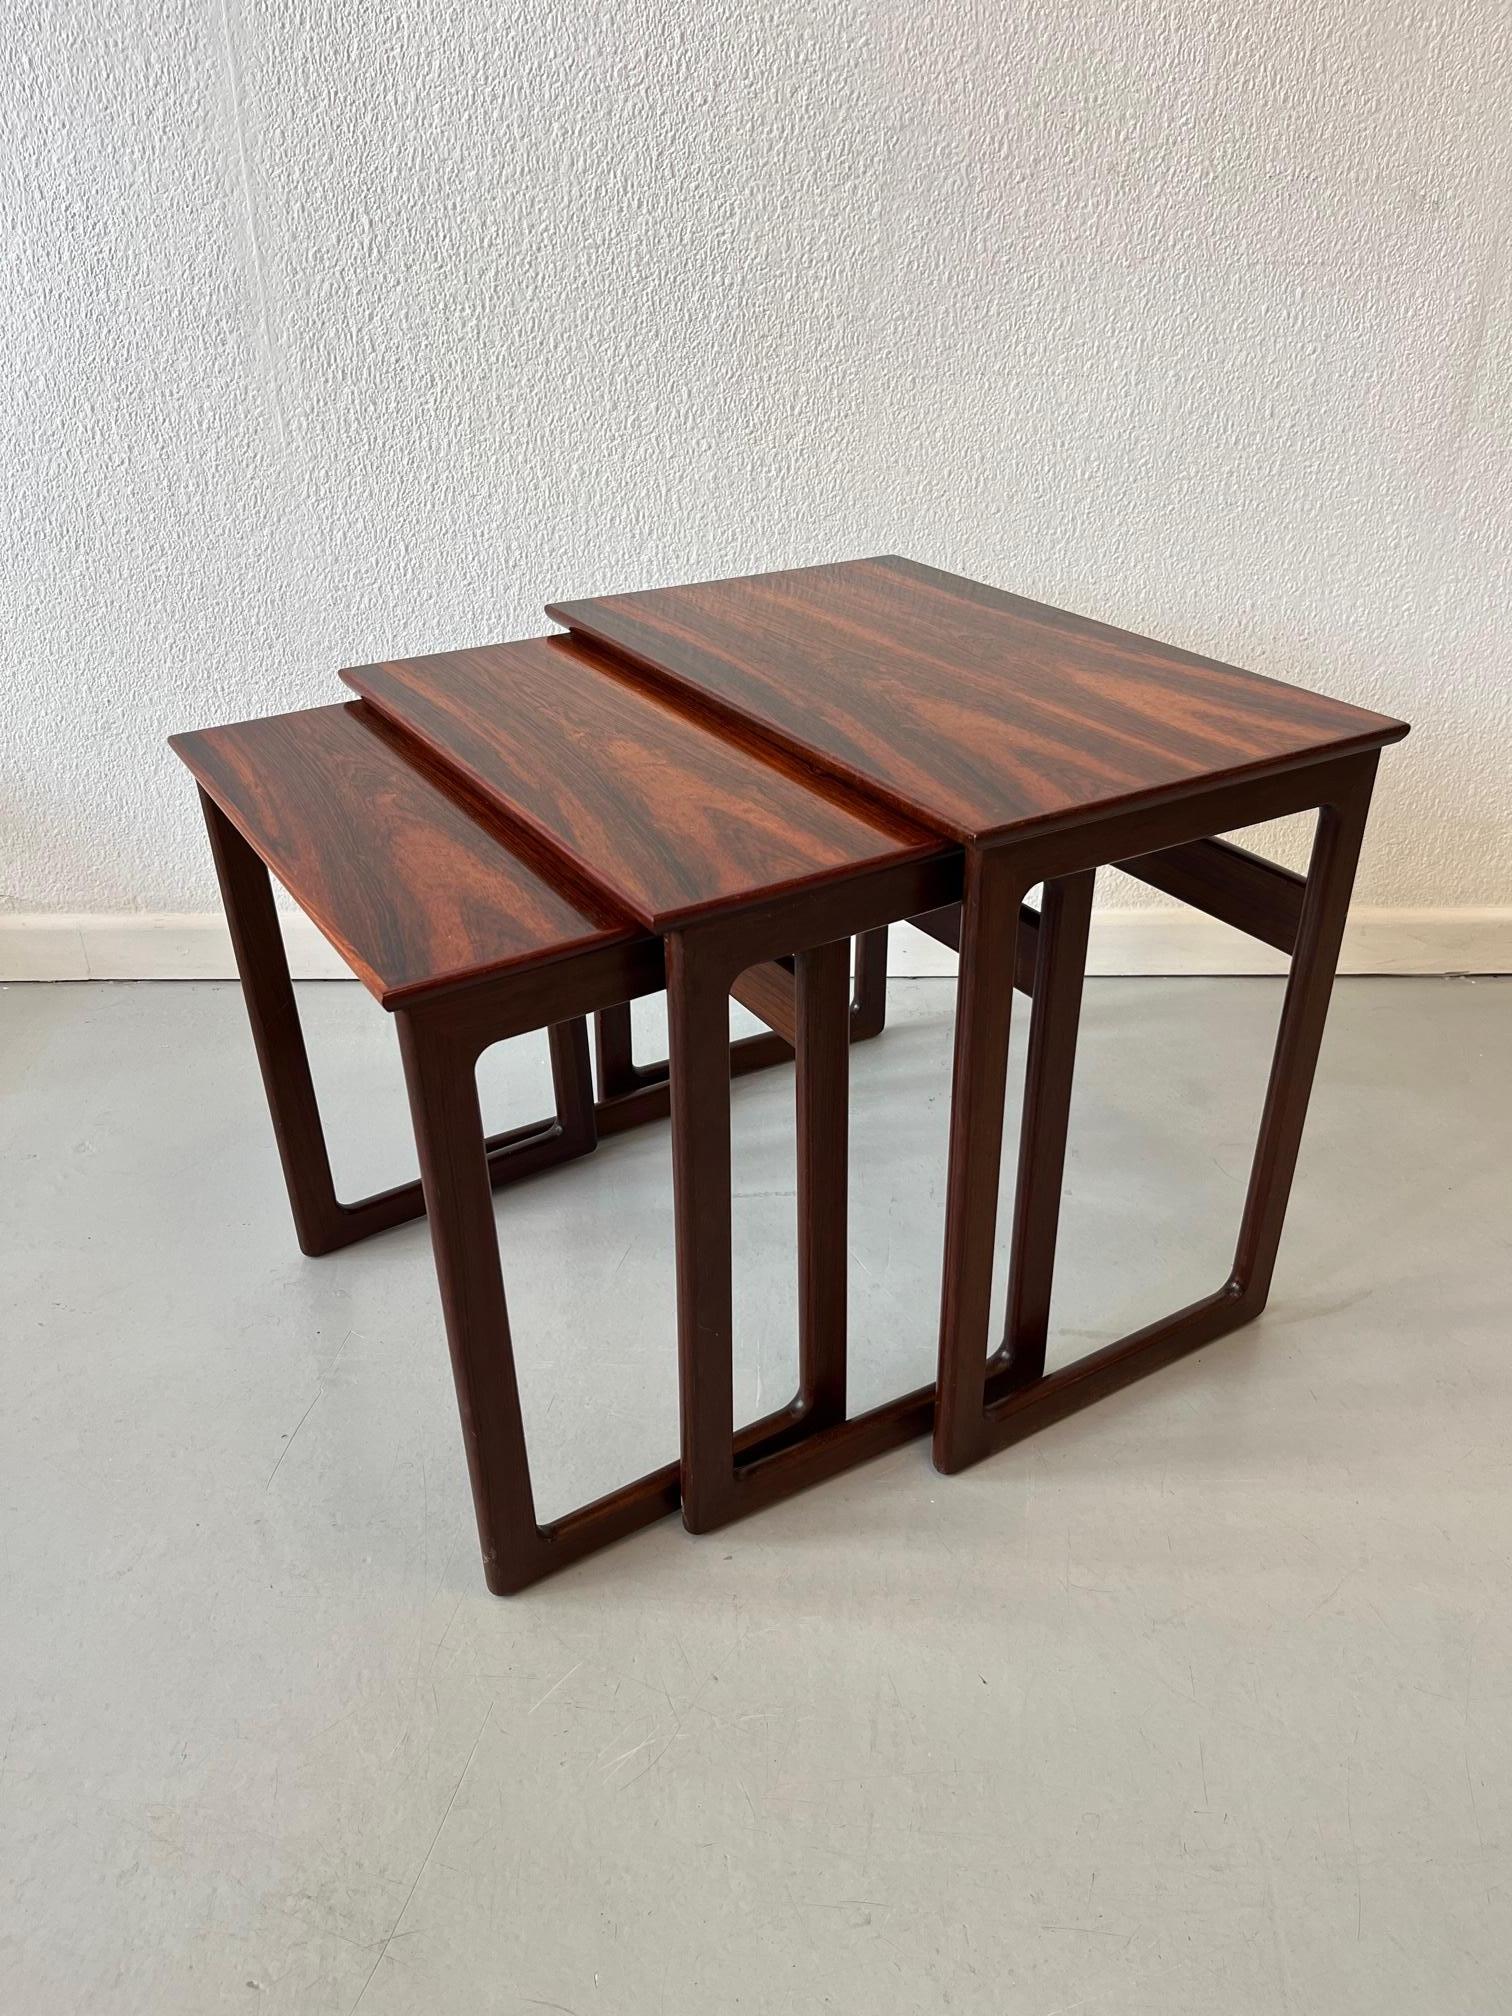 Lovely set of 3 nesting tables made of Rio Rosewood, signed with a manufacturer label we cannot identify but clearly a quality manufacure from Denmark ca. 1960s
Good vintage condition. The table tops have been refinished by a professional.

